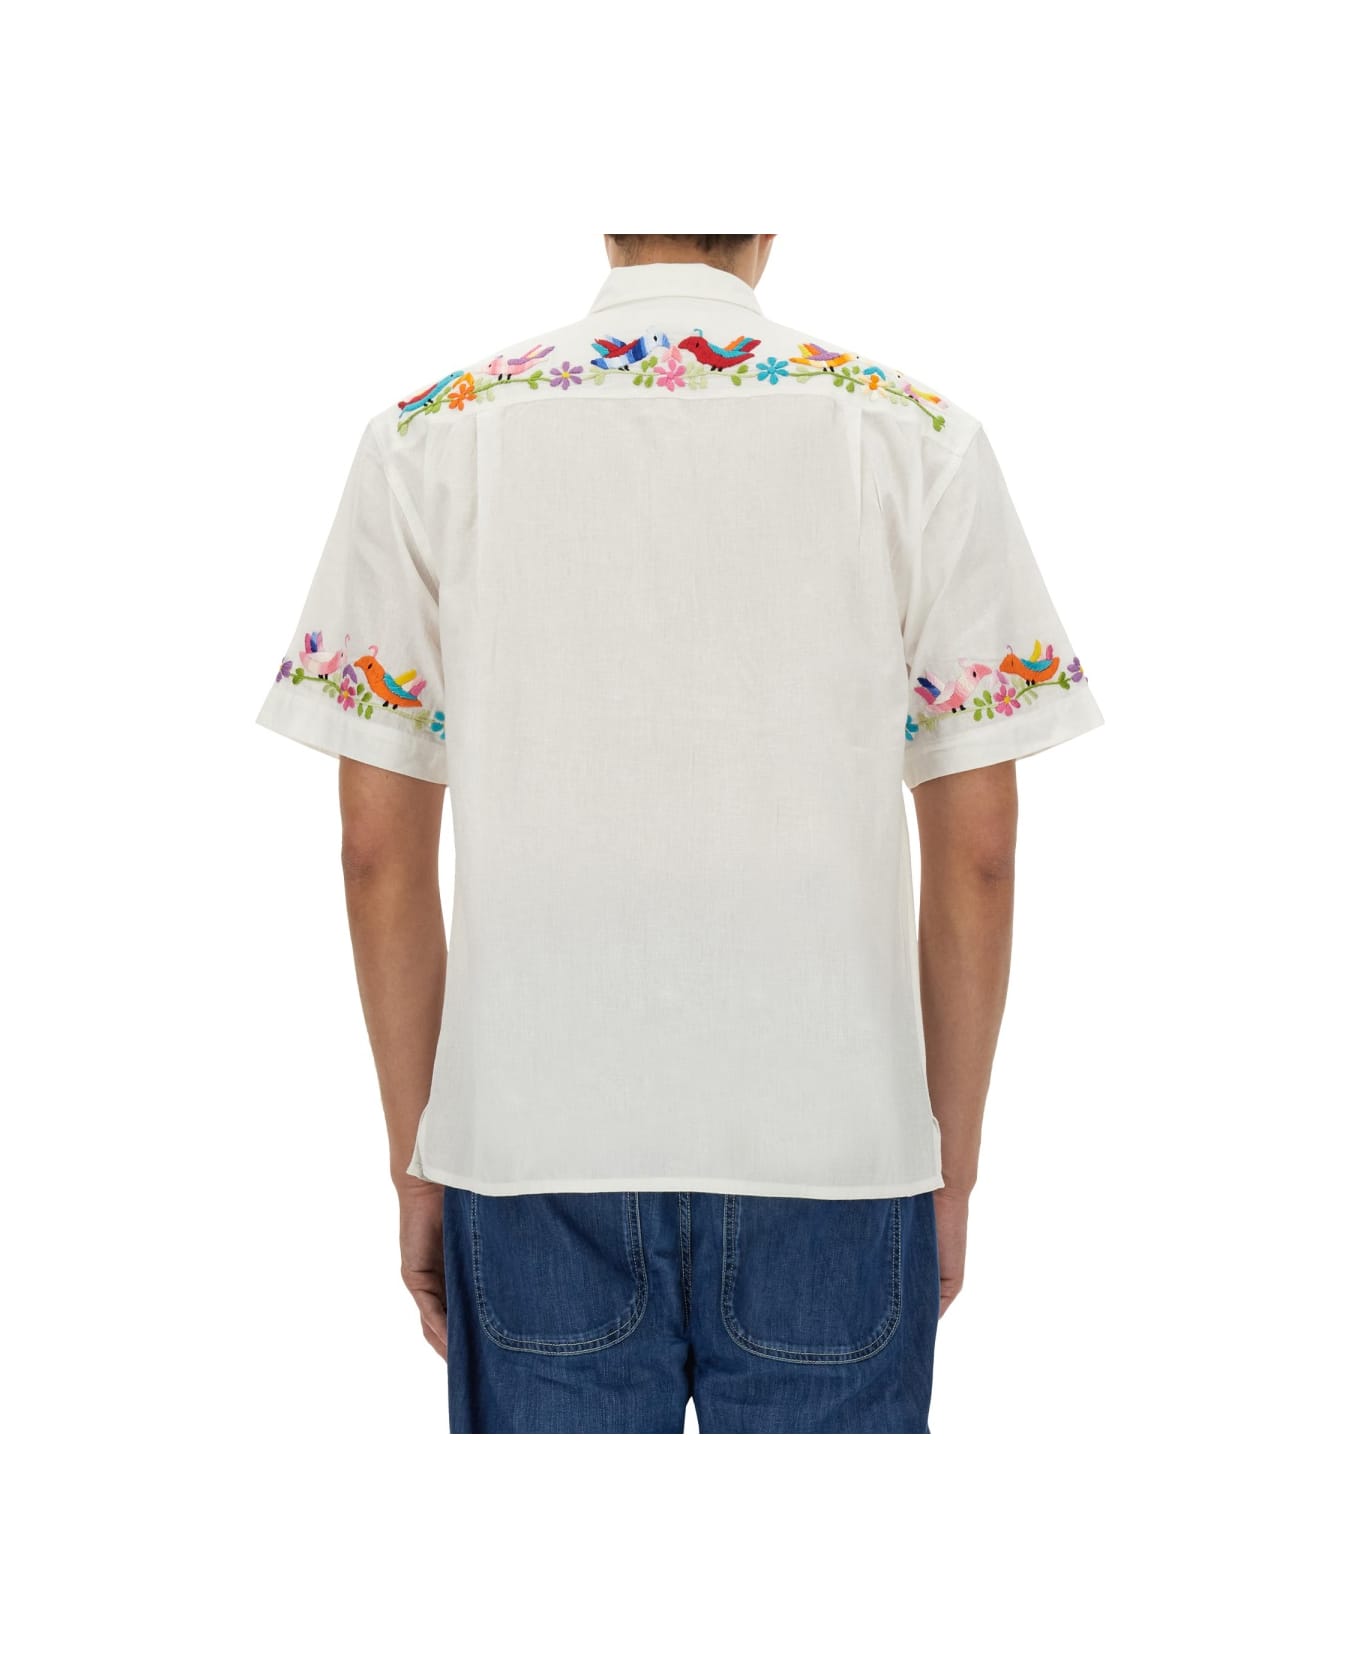 YMC Shirt With Embroidery - POWDER